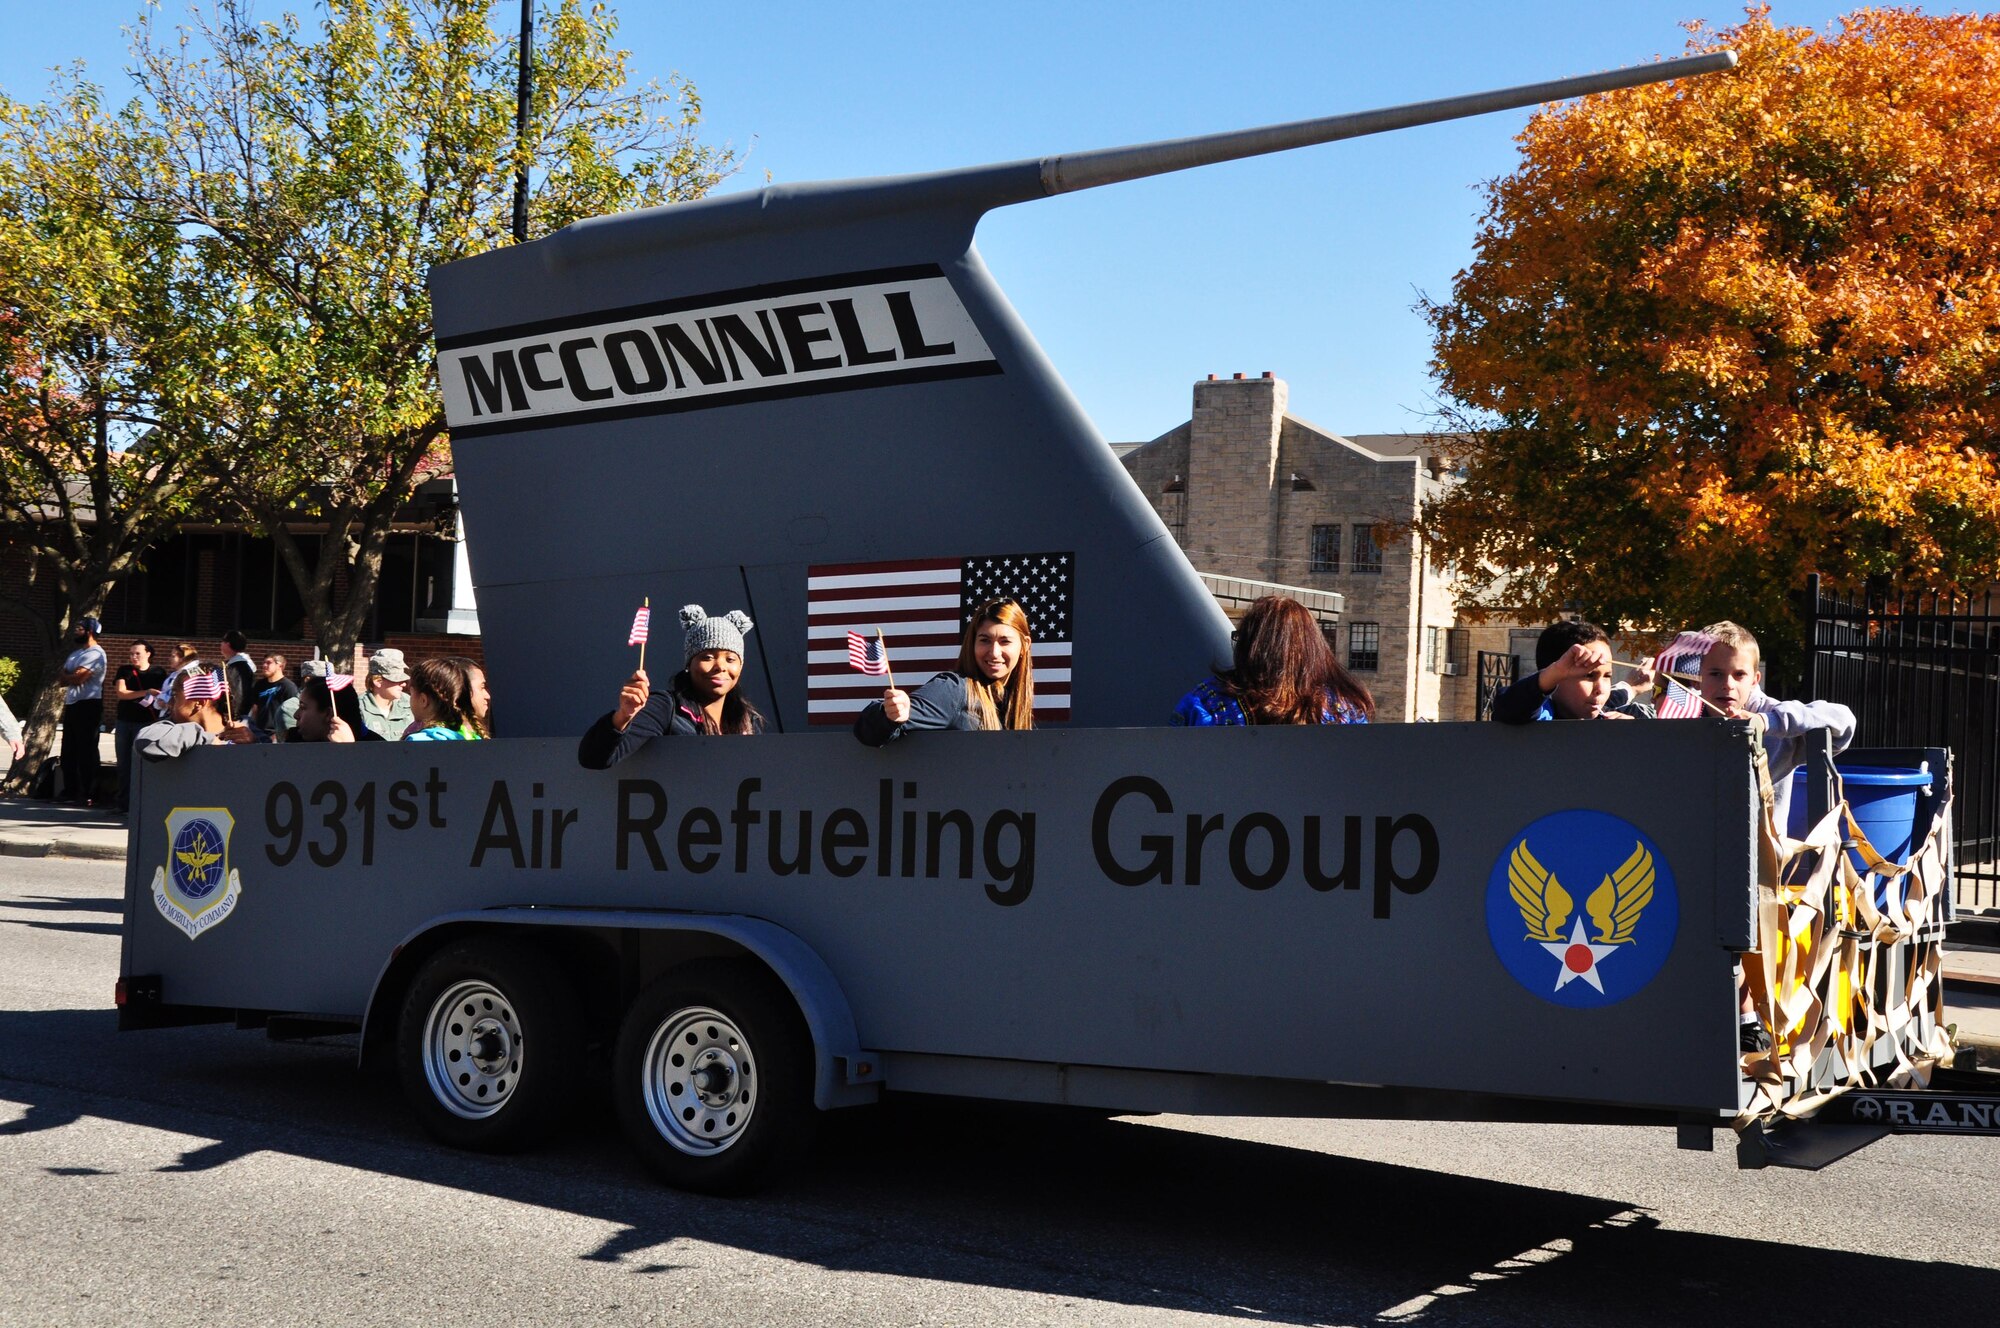 Several members of Team McConnell participated in the 2015 Veterans Day Parade in downtown Wichita, Kan., Nov. 8, 2015.  The Total force representation from the active duty 22nd Air Refueling Wing and the Reserve 931st Air Refueling Group took part in the parade as a way to honor U.S. military veterans.  (U.S. Air Force photo by Tech. Sgt. Abigail Klein)